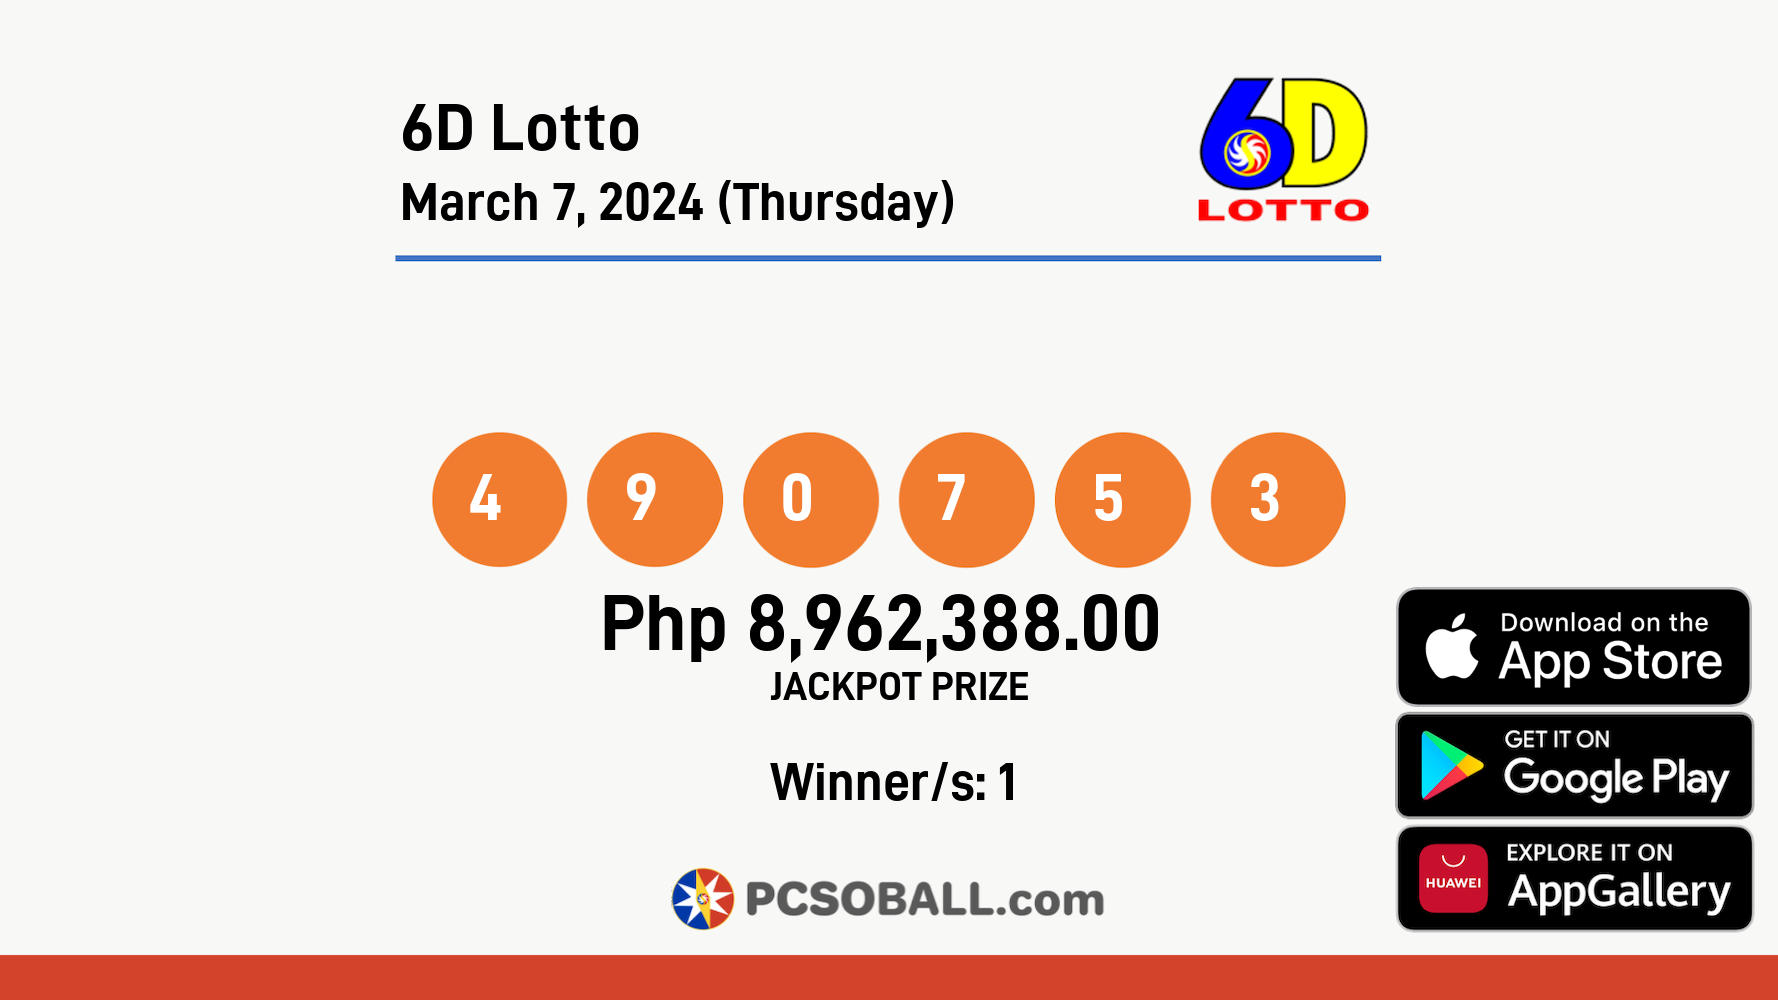 6D Lotto March 7, 2024 (Thursday) Result